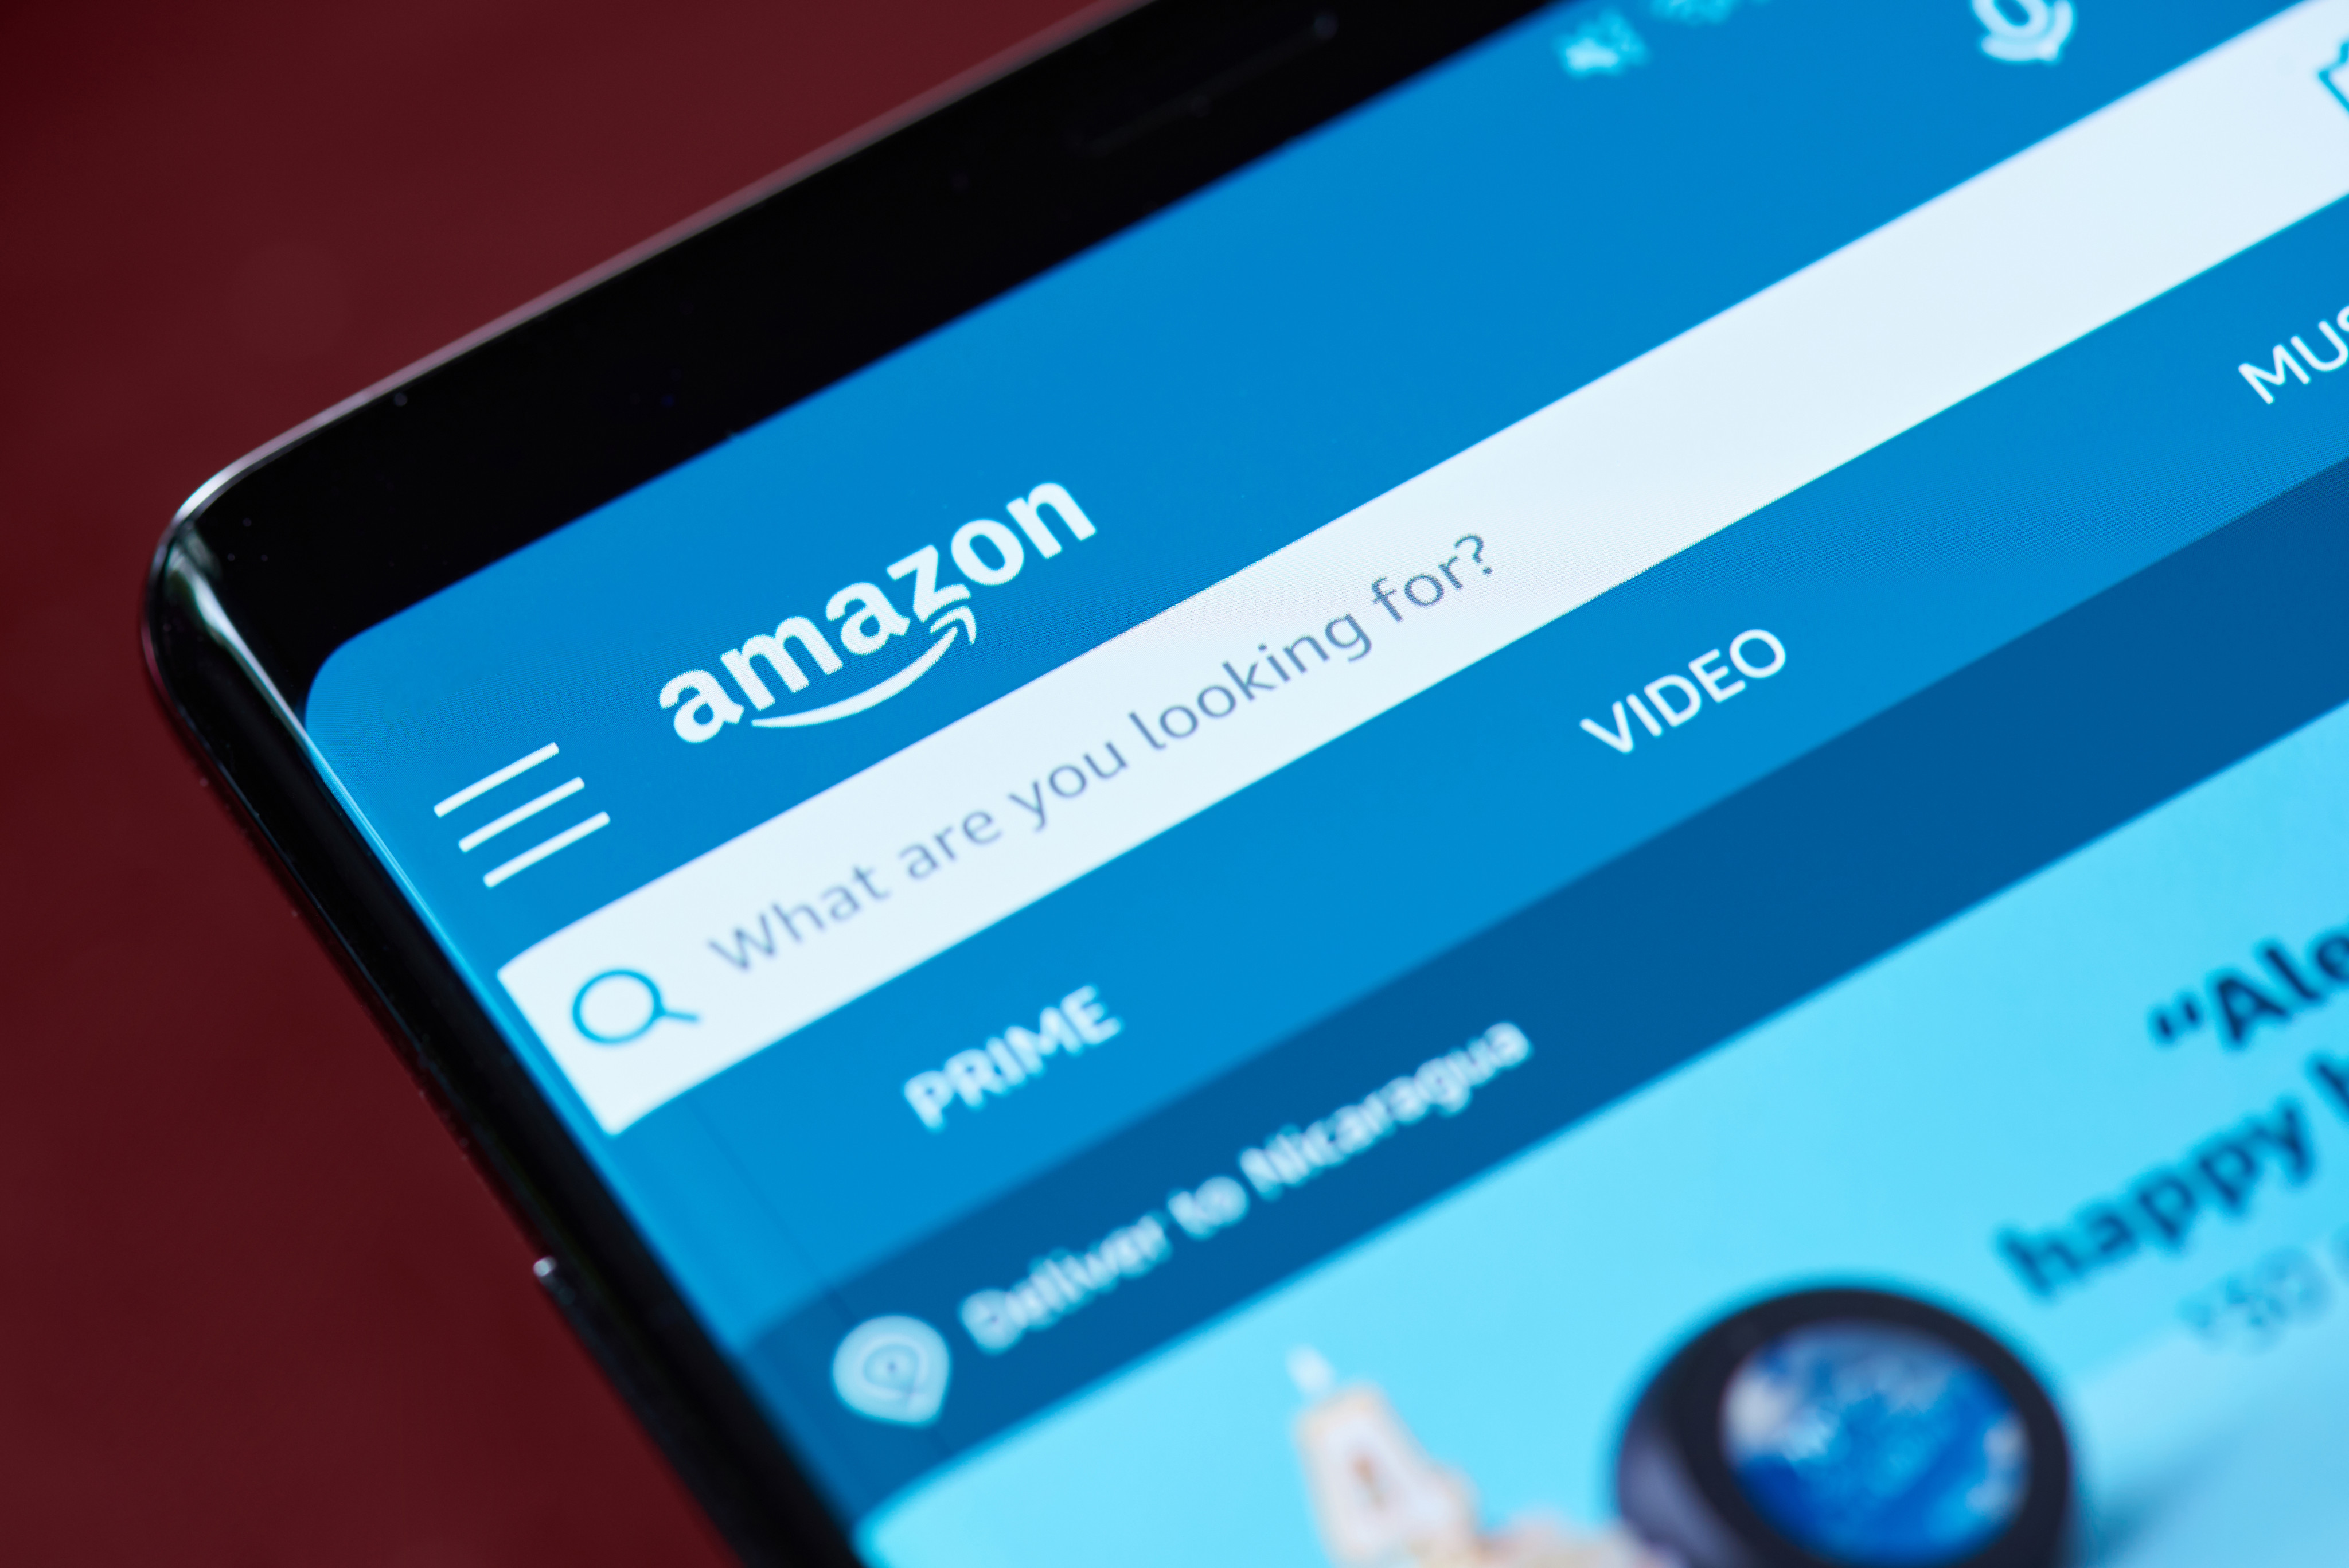 Amazon is looking to add generative artificial intelligence to search on its online store, according to job postings. Photo: Shutterstock